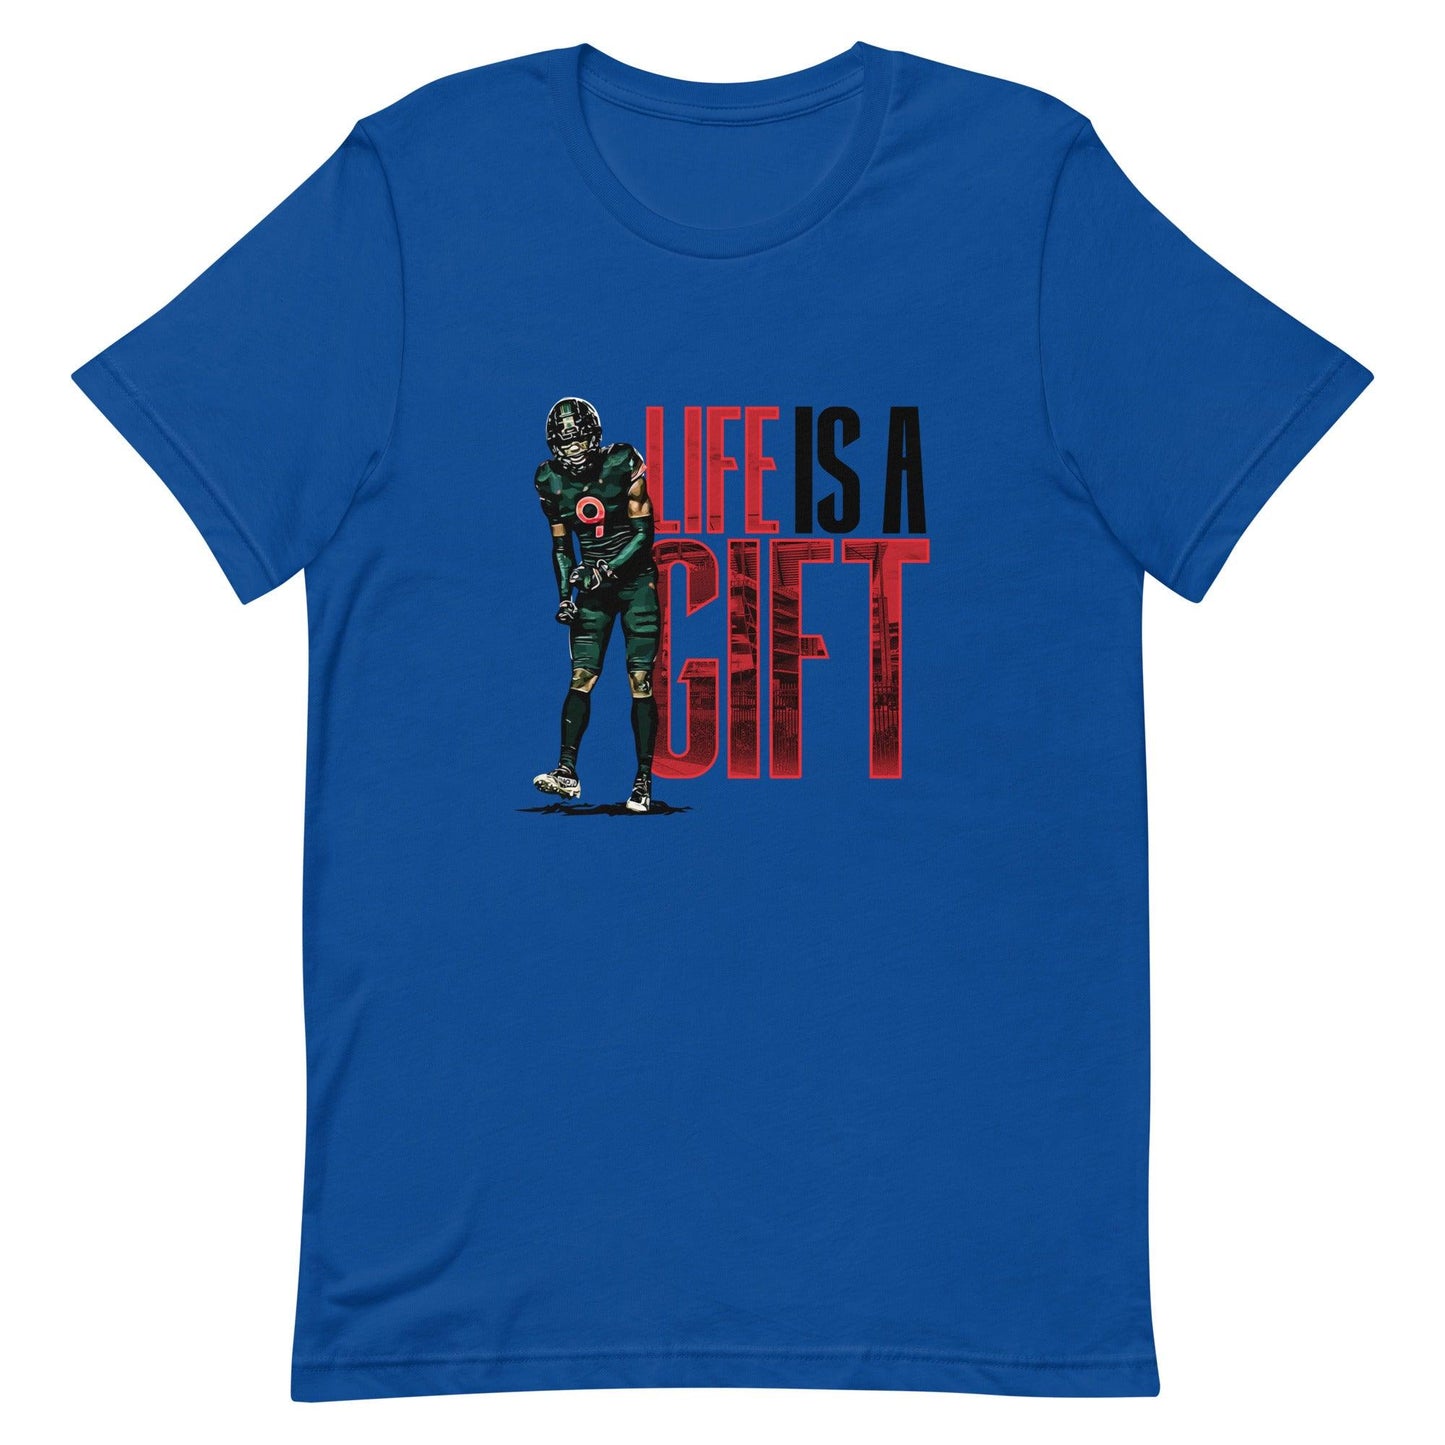 Avery Huff Jr. “Gifted” t-shirt - Fan Arch